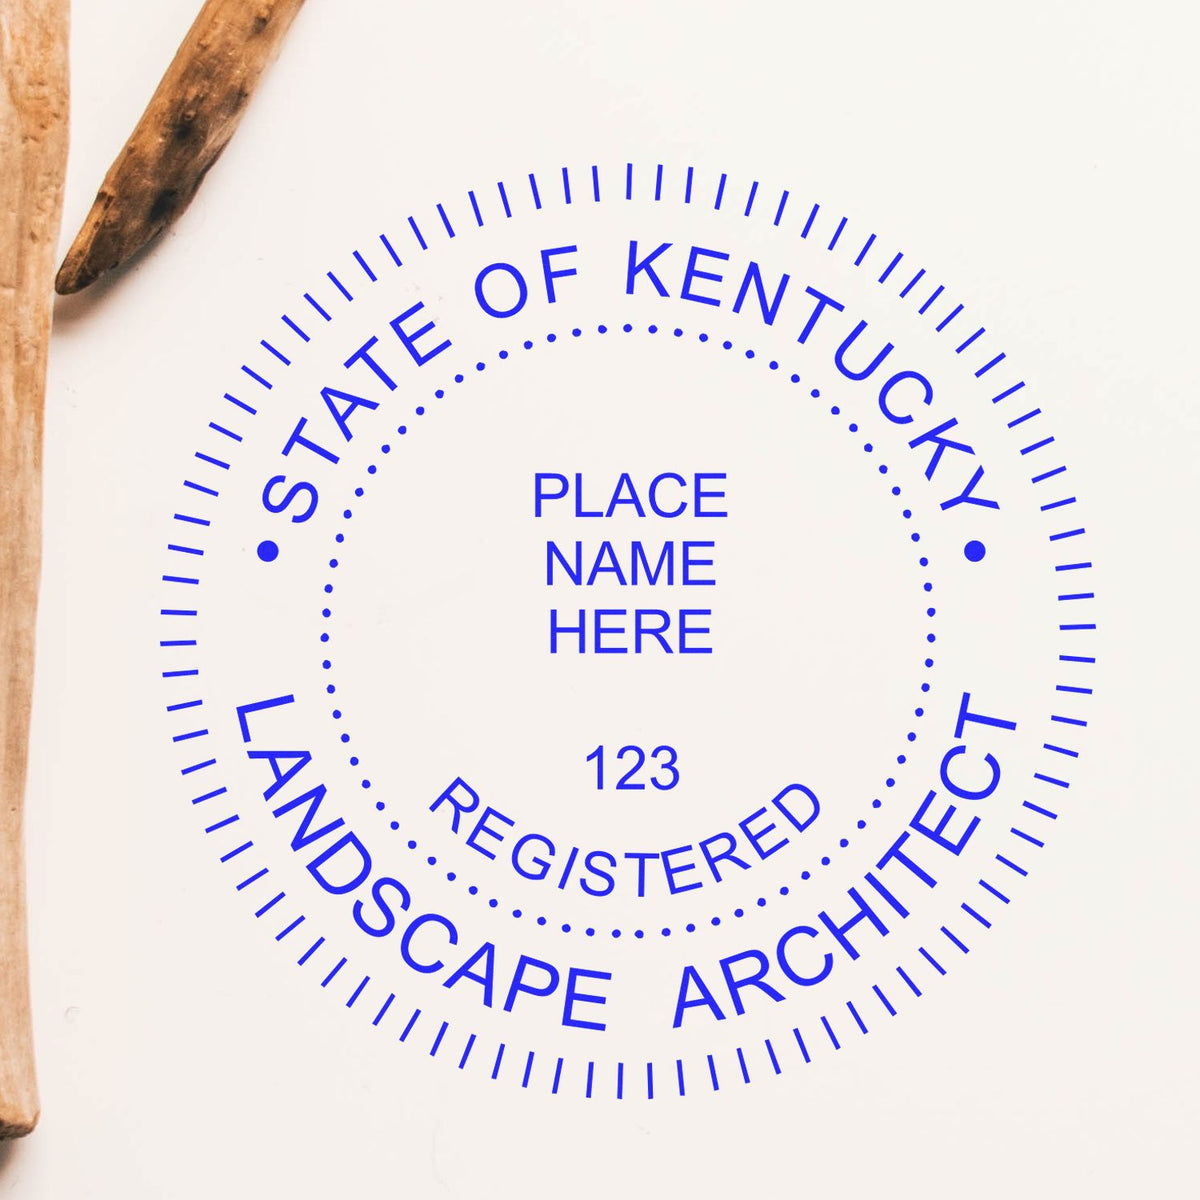 The Slim Pre-Inked Kentucky Landscape Architect Seal Stamp stamp impression comes to life with a crisp, detailed photo on paper - showcasing true professional quality.